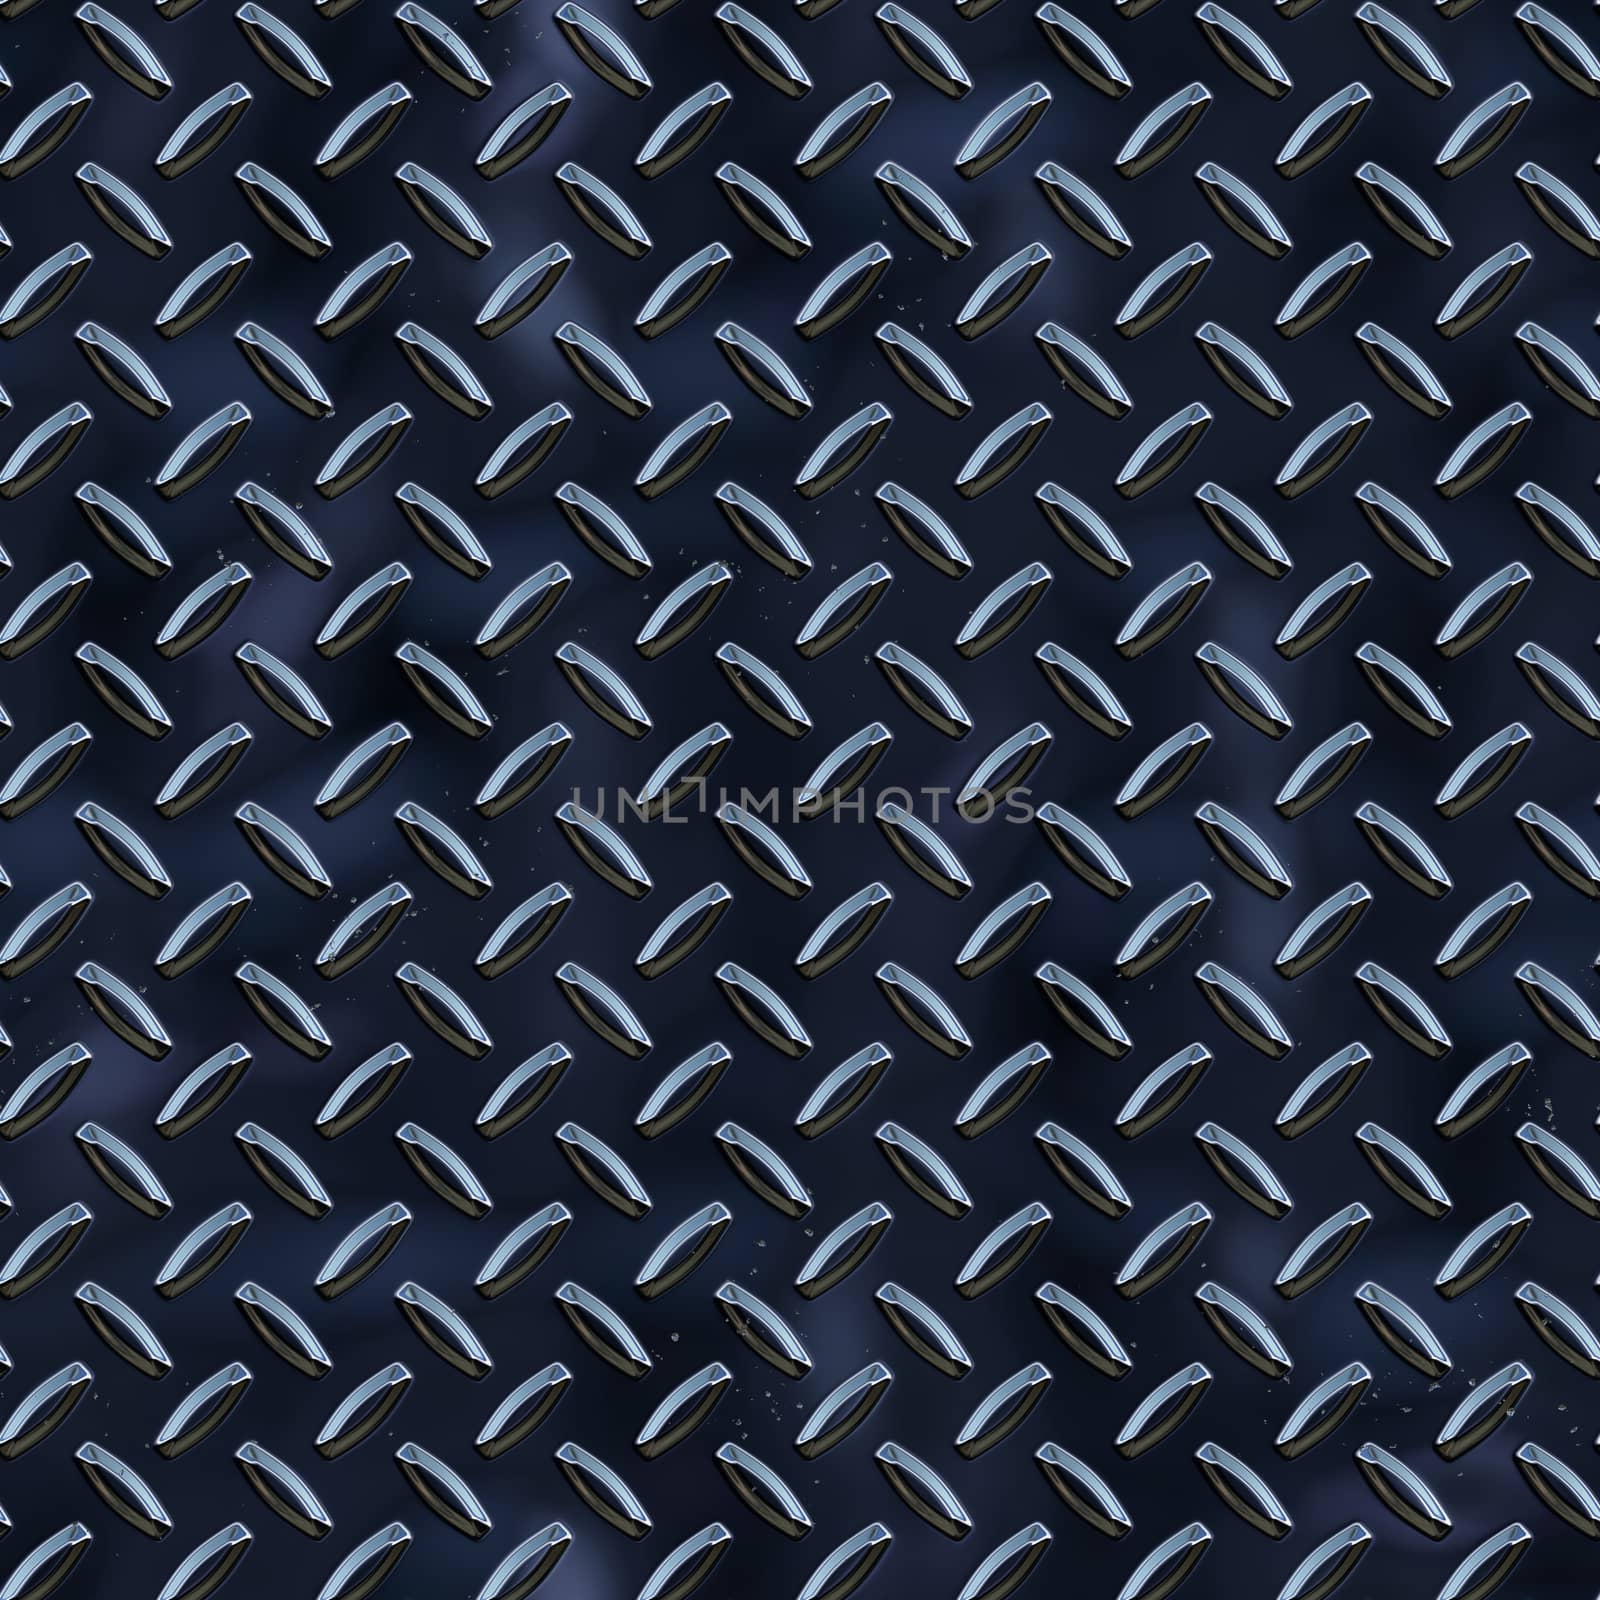 Blue Black Metal Plate Seamless Texture by whitechild